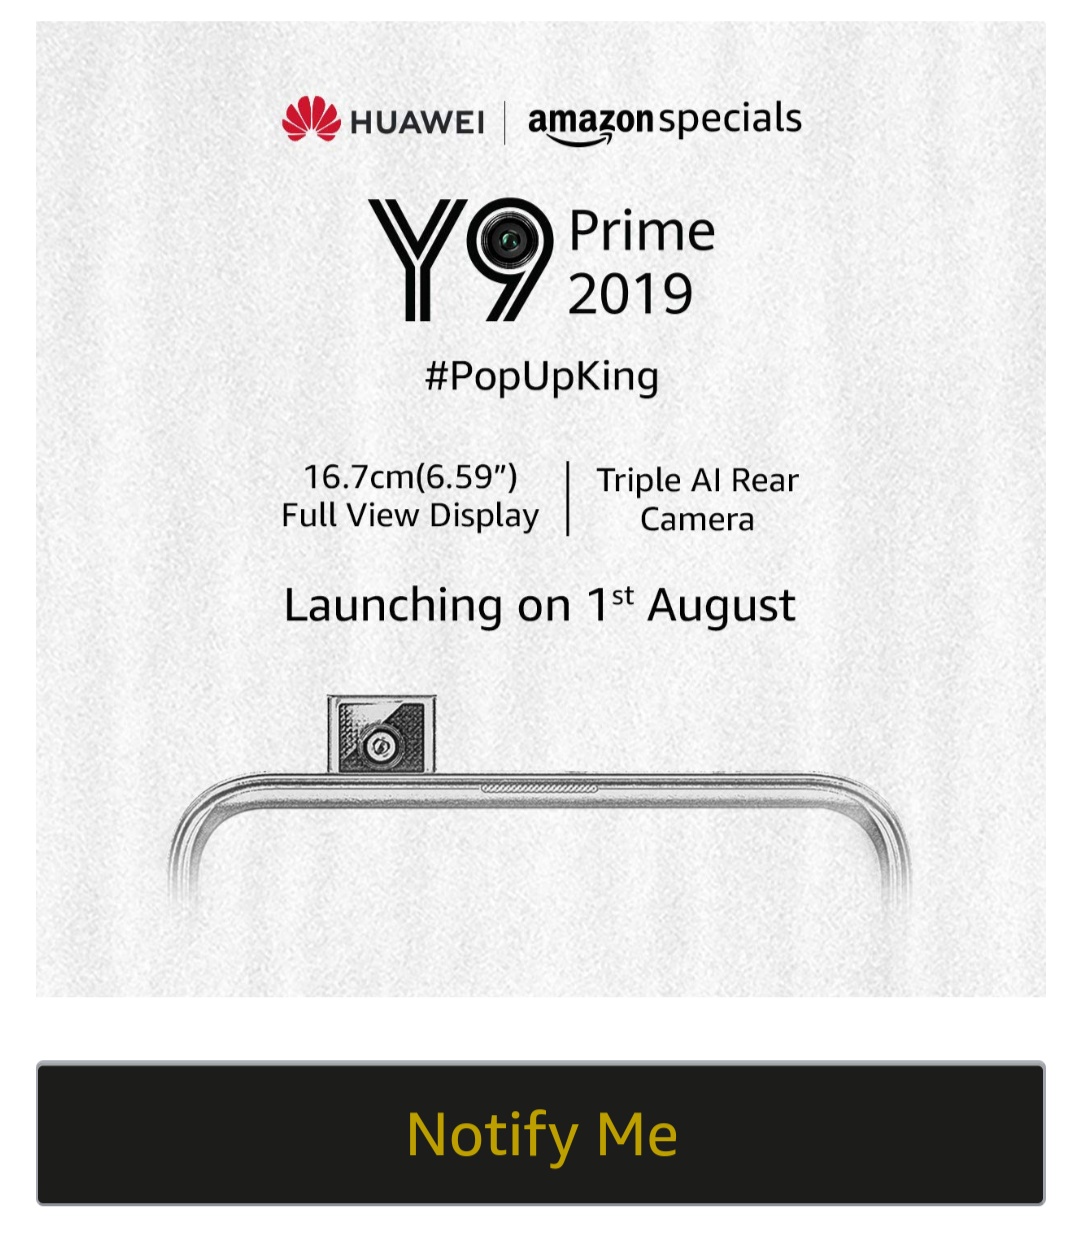 Huawei Y9 Prime 2019 to launch in India on August 1st #PopUpKing